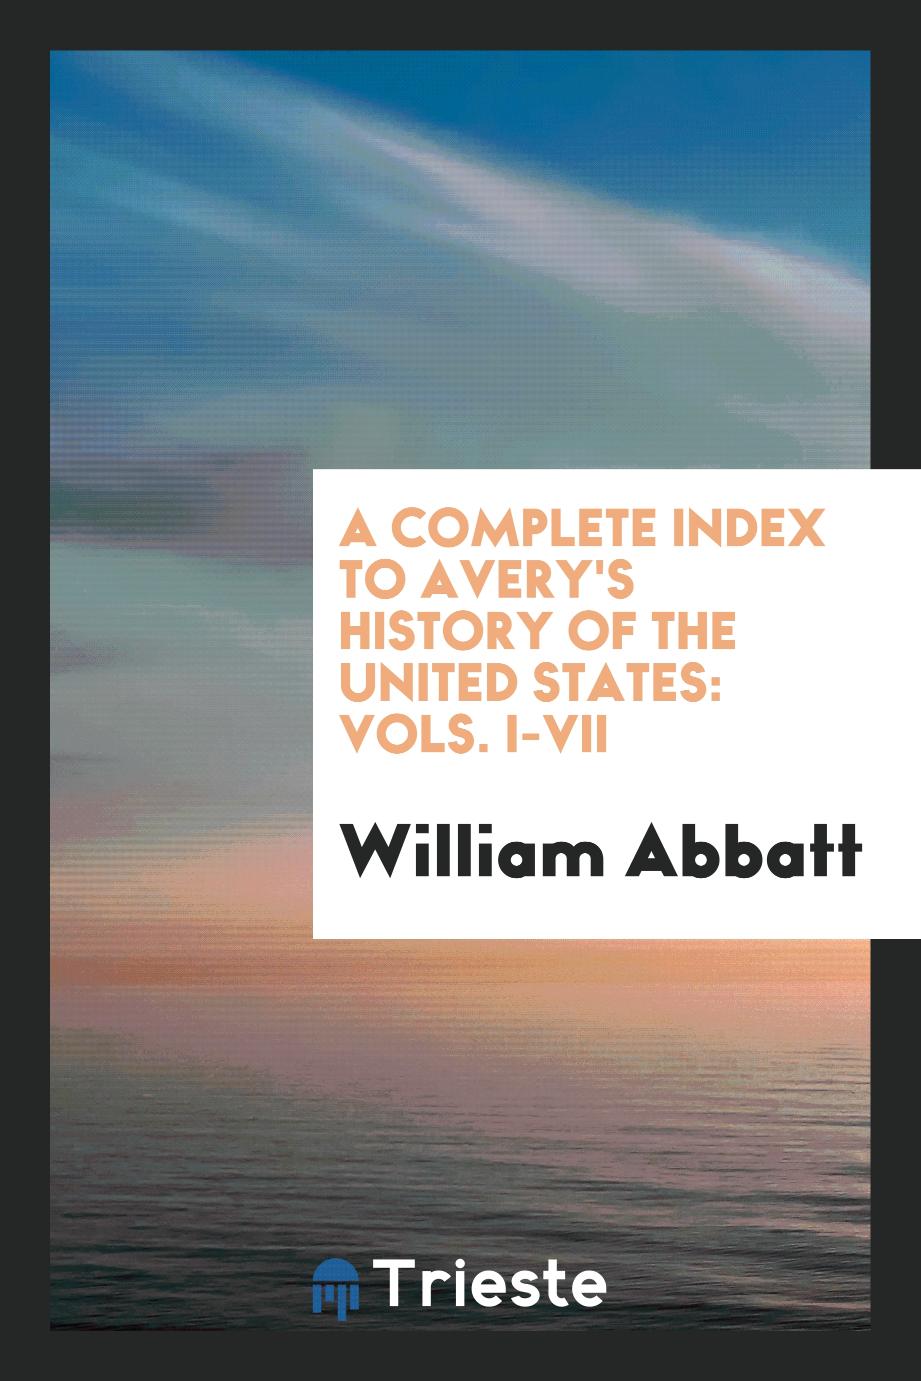 A Complete Index to Avery's History of the United States: Vols. I-VII